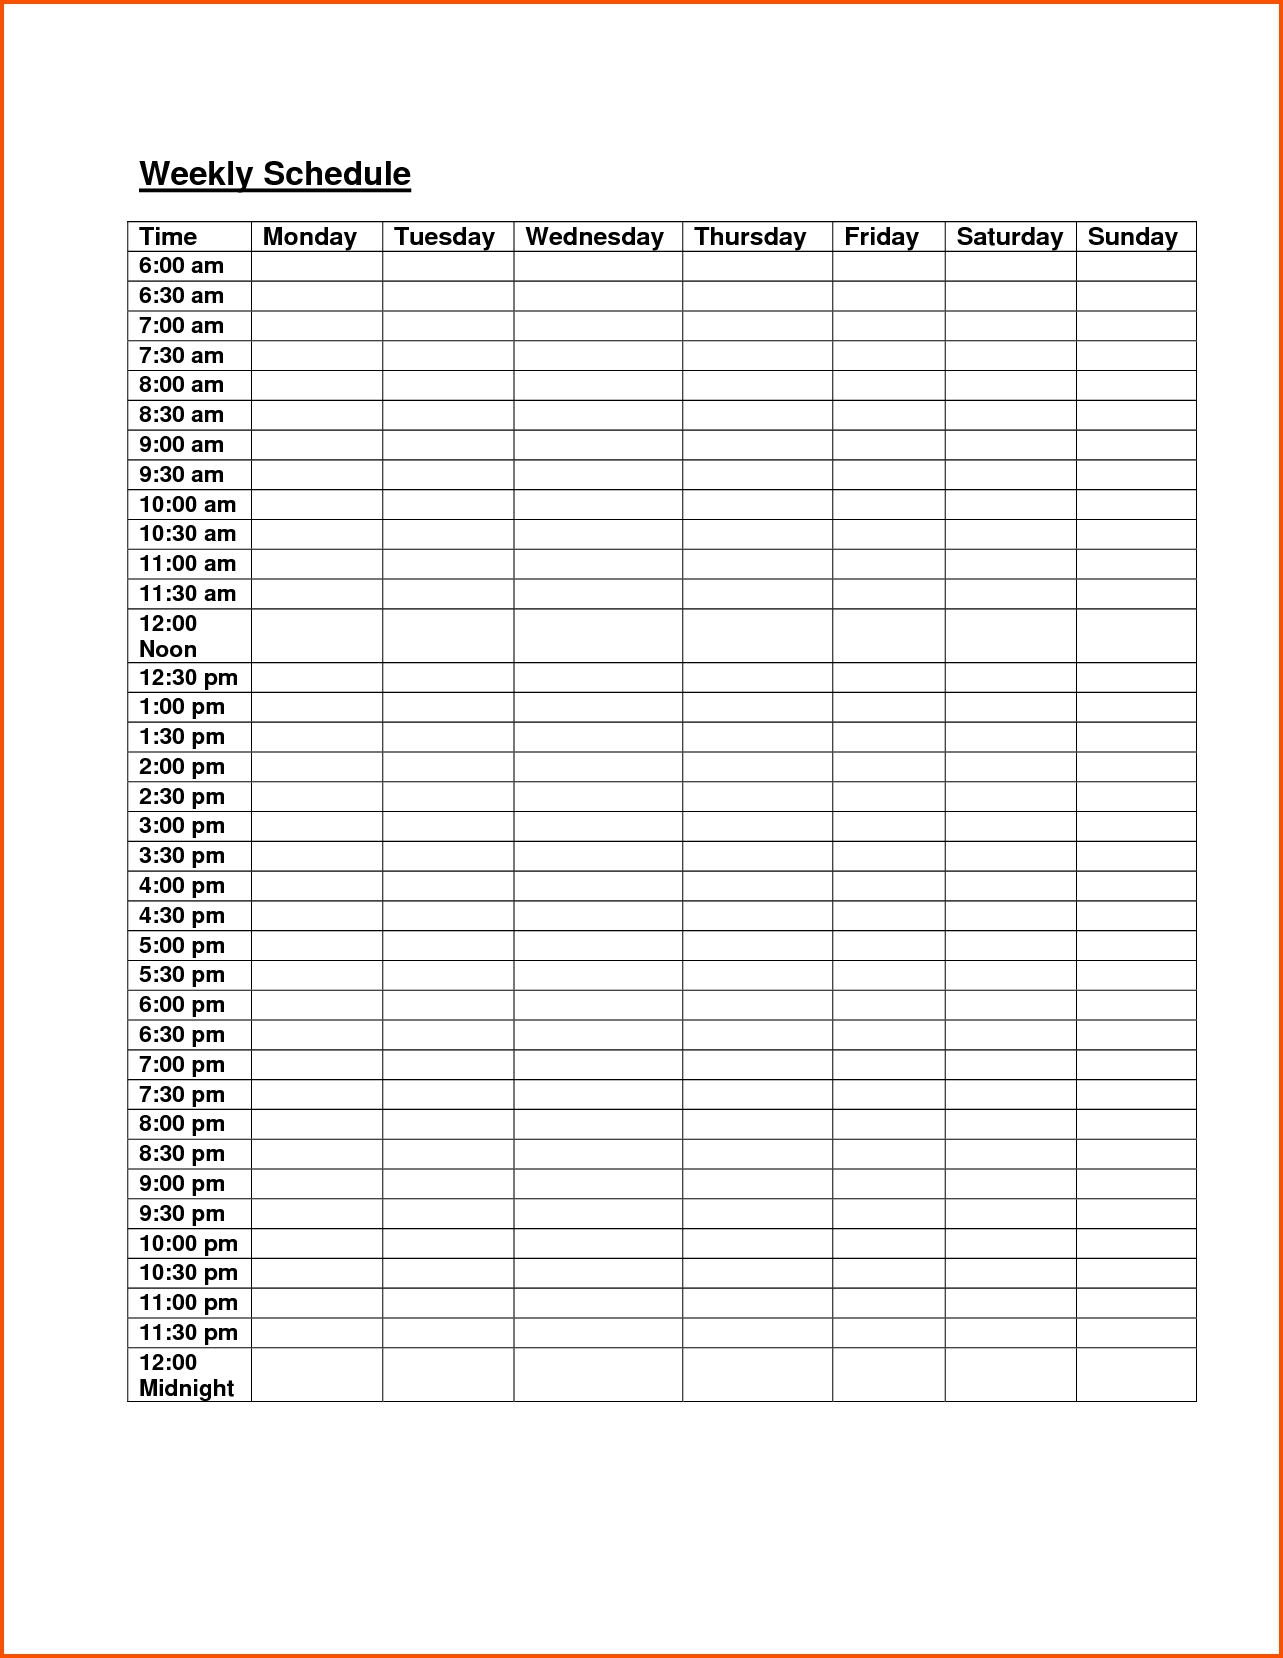 Free Weekly Class Schedule Template Excel 1 Those Who Can Teach